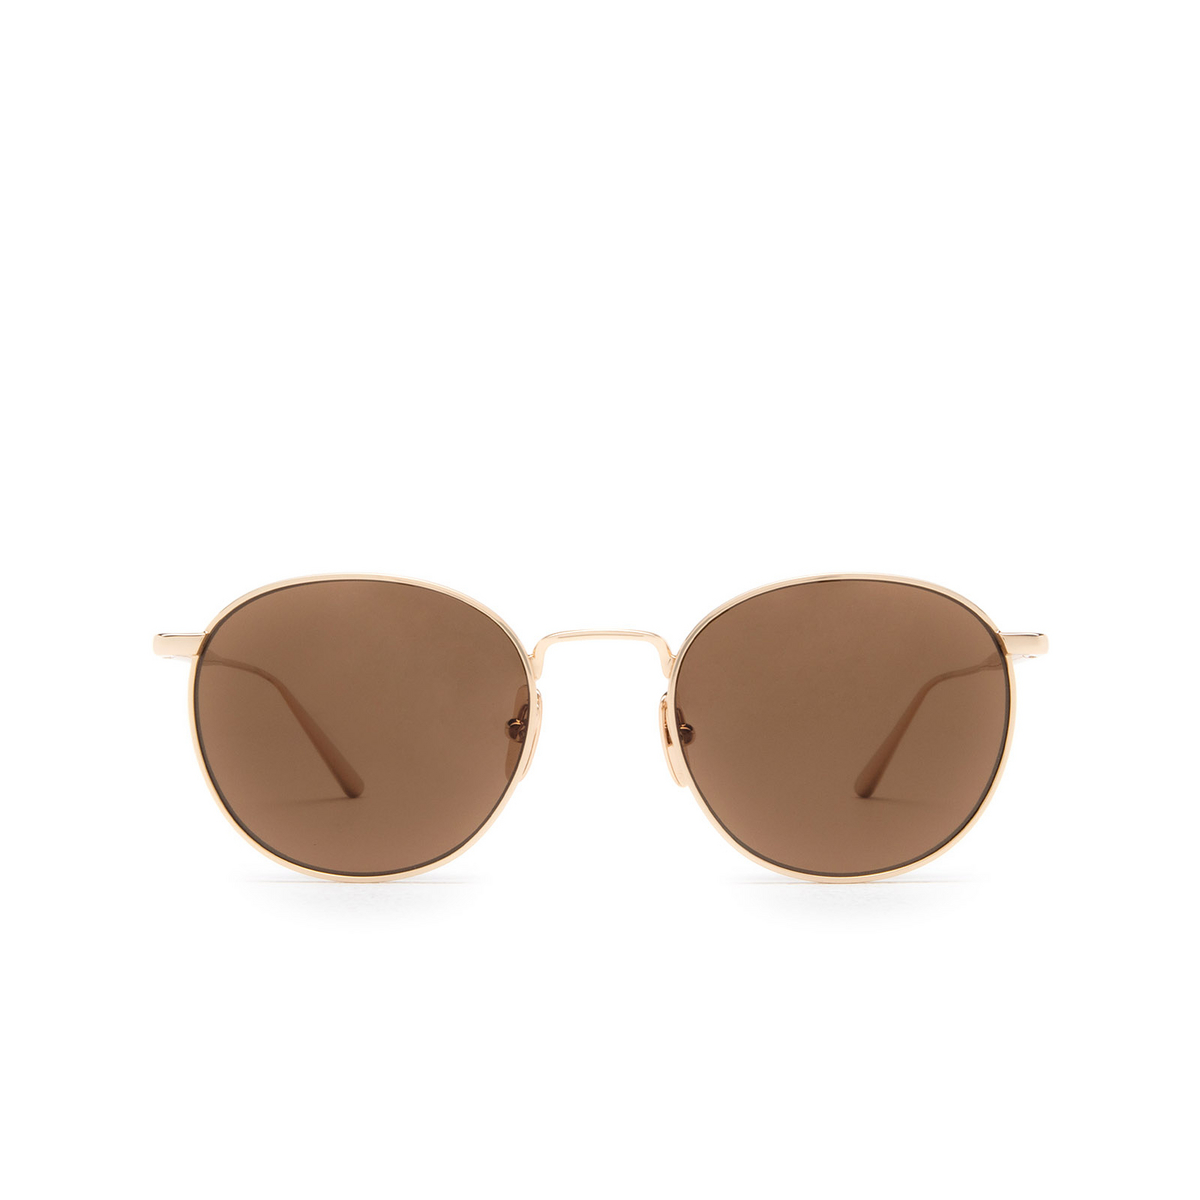 Chimi ROUND Sunglasses BROWN - front view